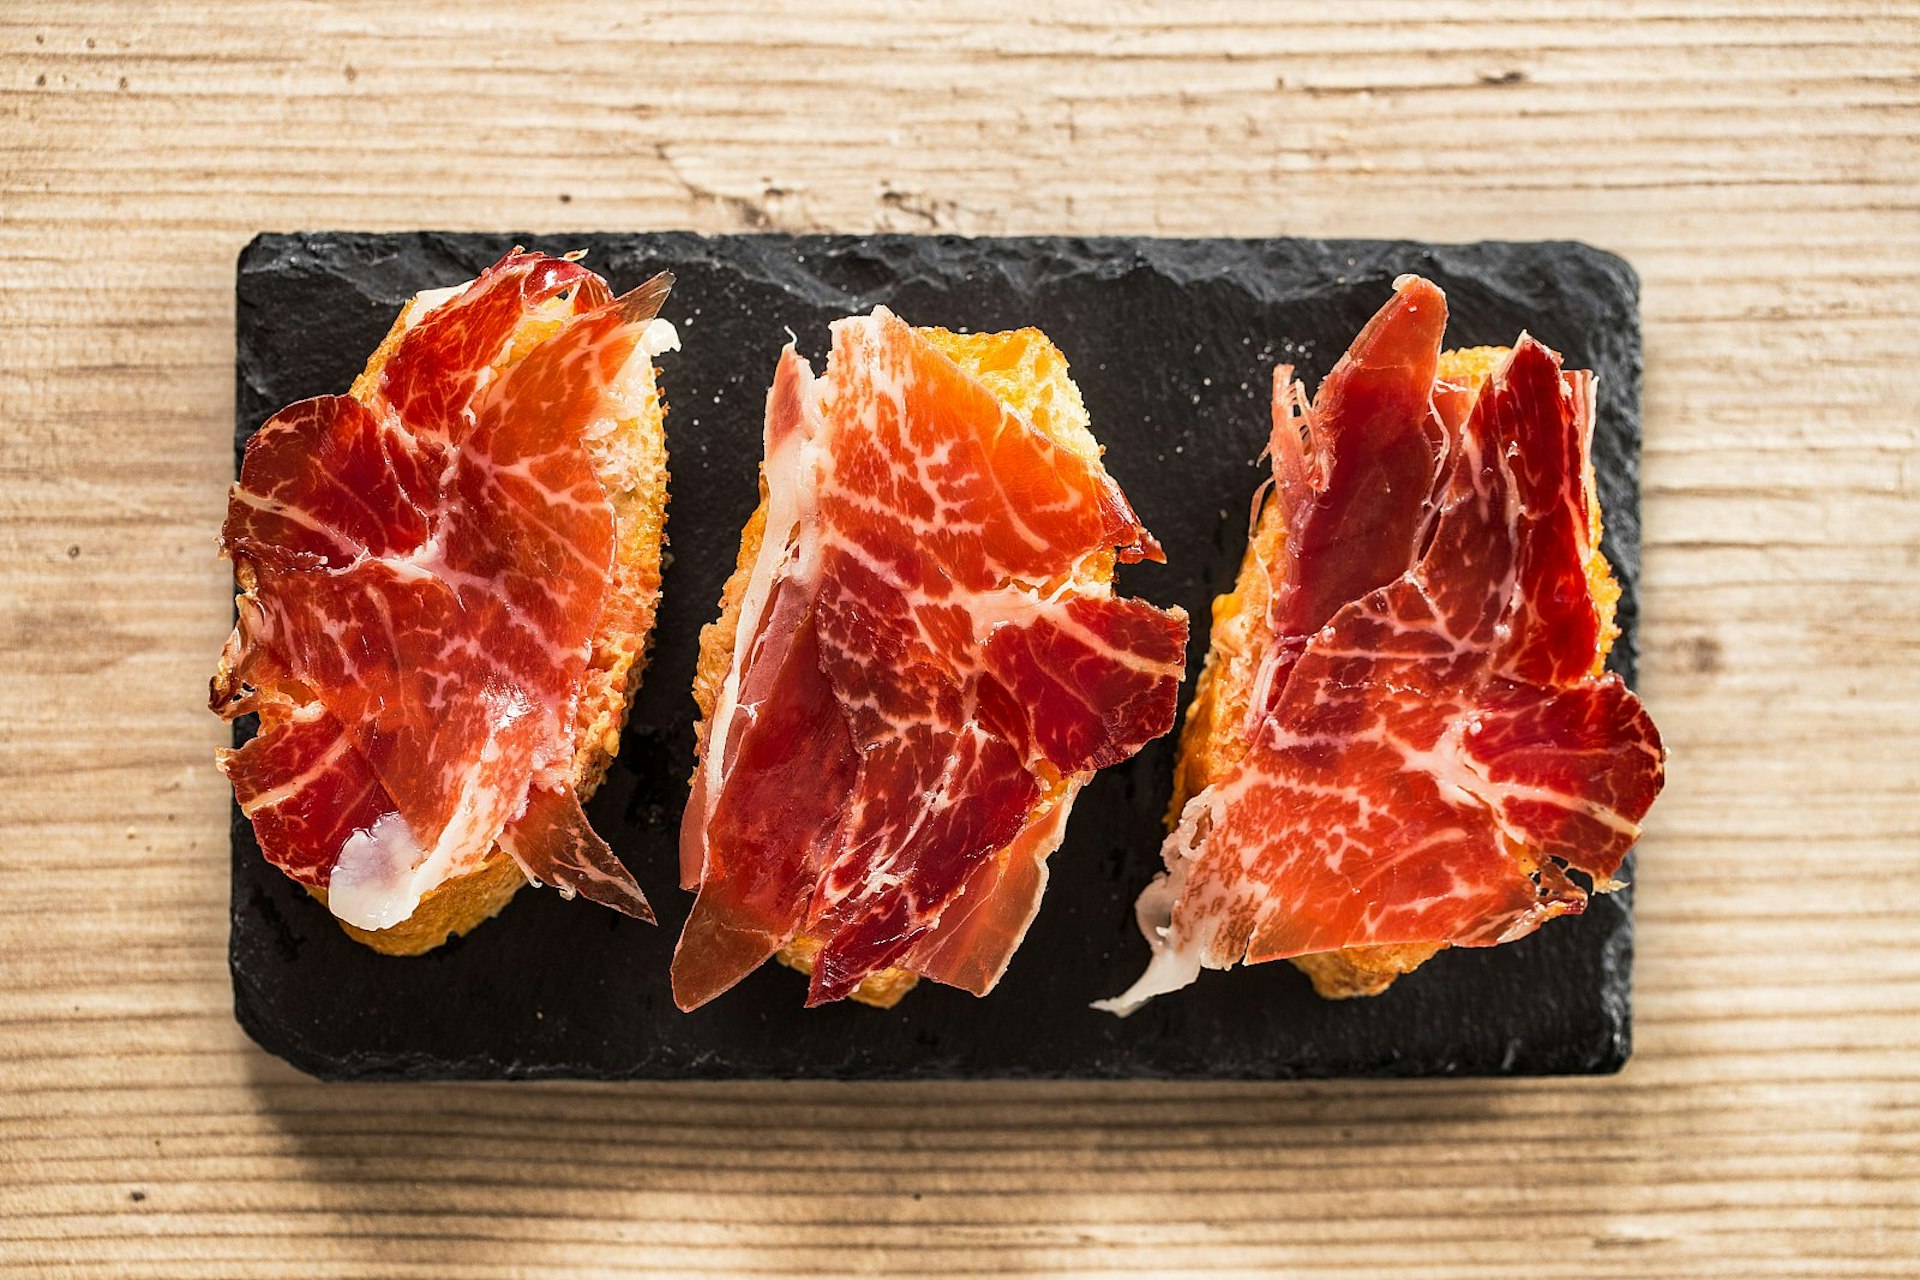 Slices of jamón ibérico on bread on a black slate on a wooden tabletop.